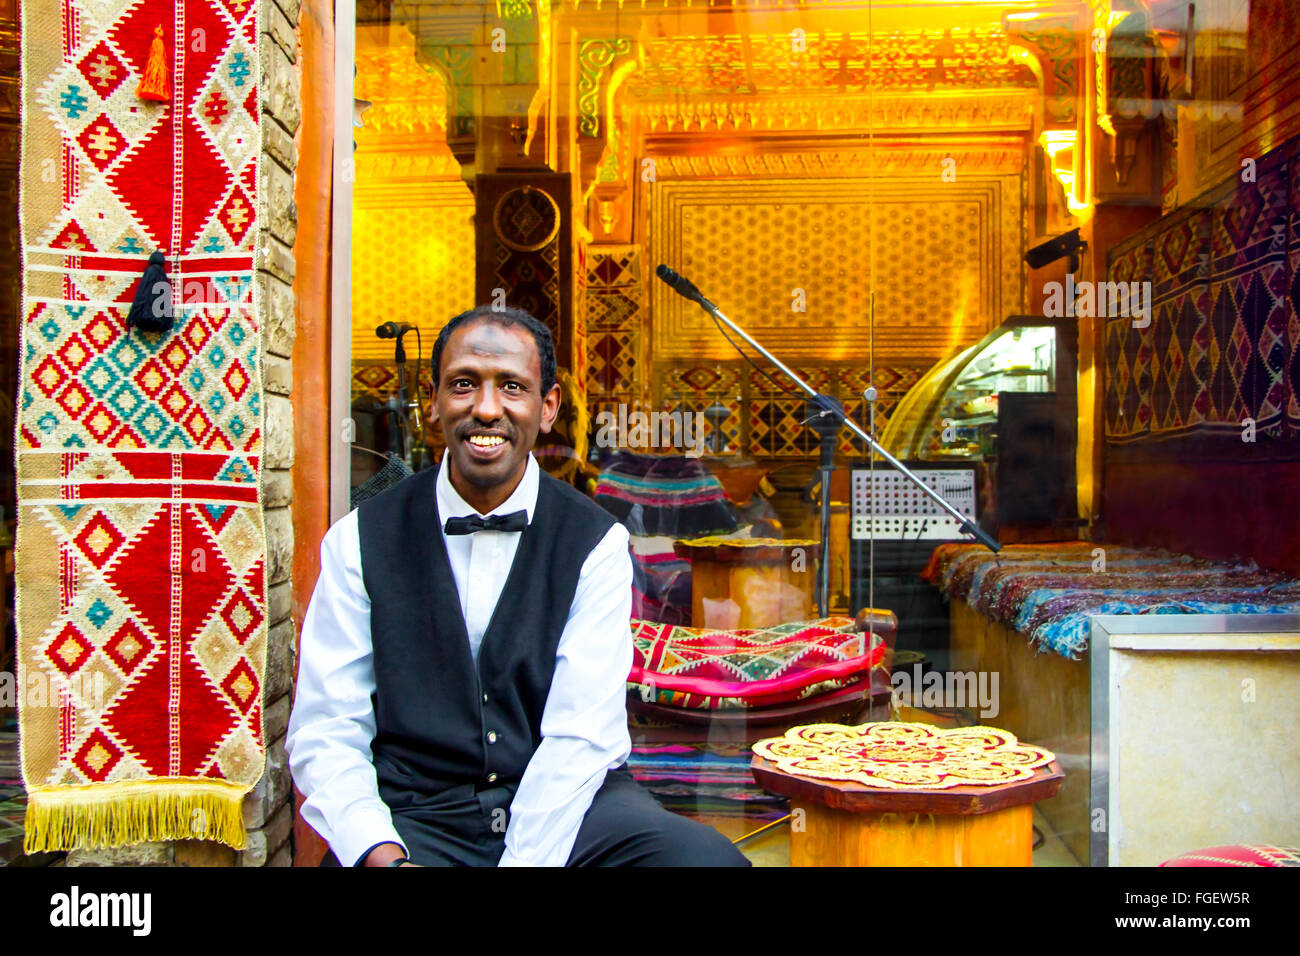 Smiling African waiter in Cairo, Egypt Stock Photo